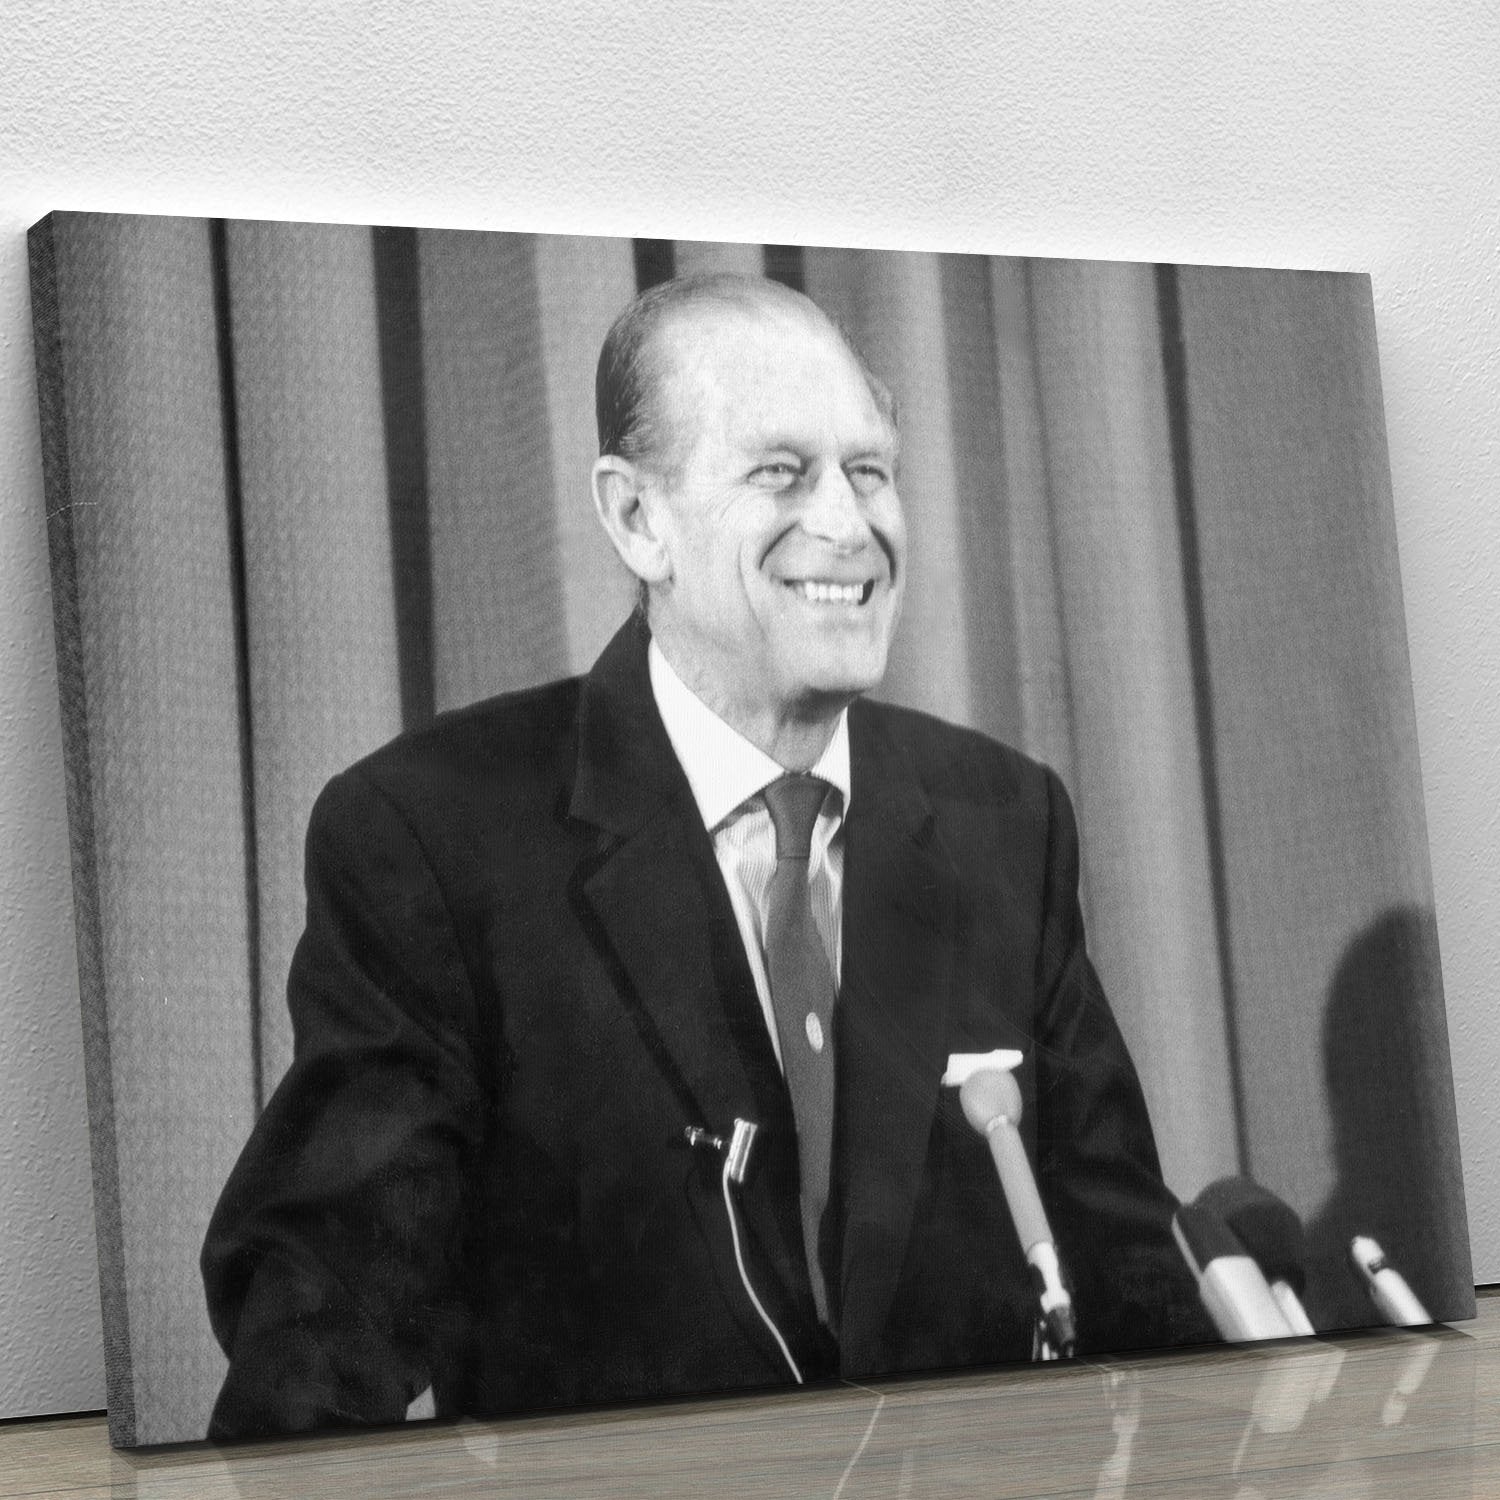 Prince Philip giving a lecture at Hudson Bay House Canvas Print or Poster